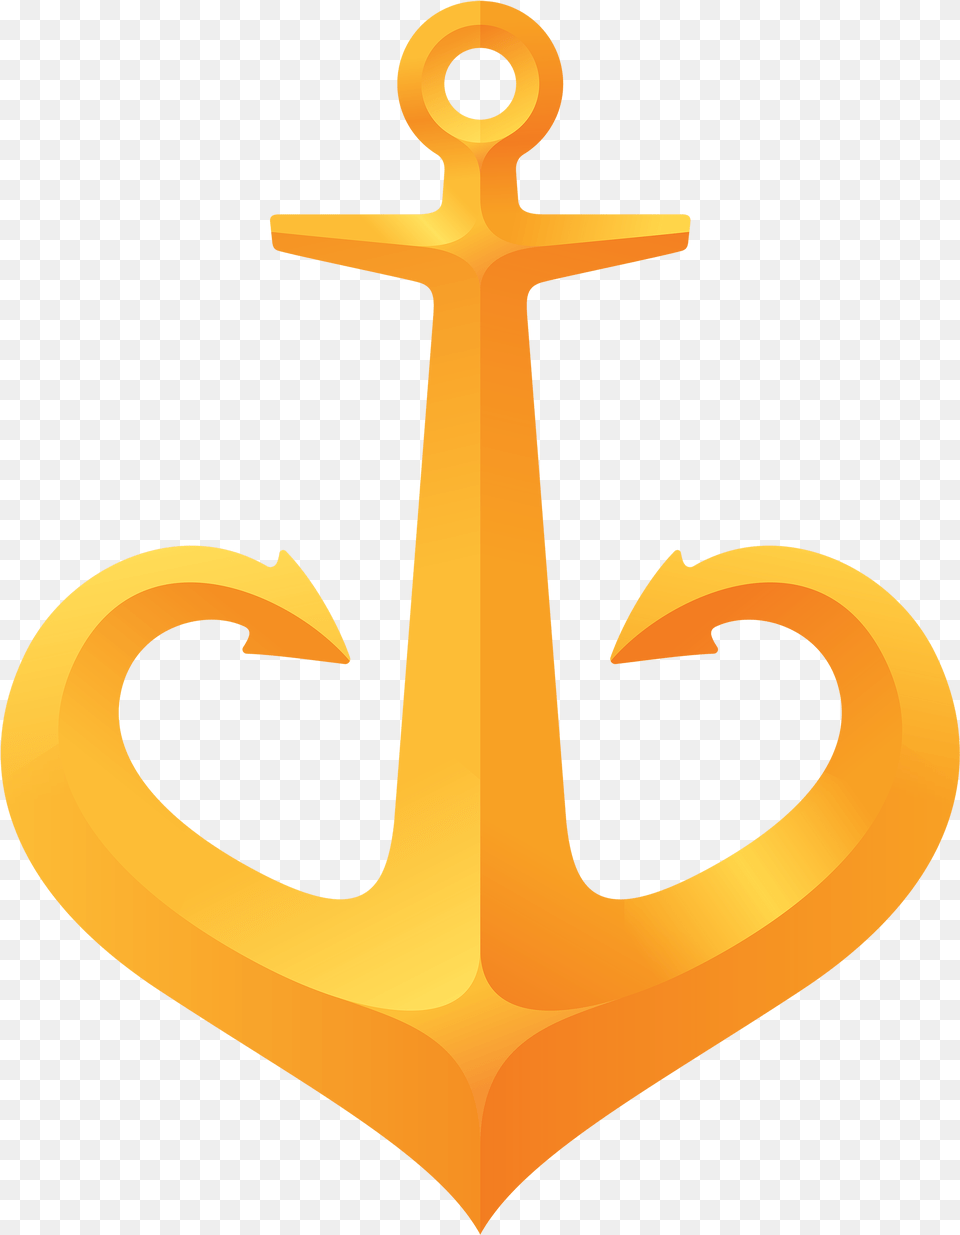 Vector Emblem Of Odessa Anchor Heart Tourist Logo And In Odessa, Electronics, Hardware, Hook, Cross Png